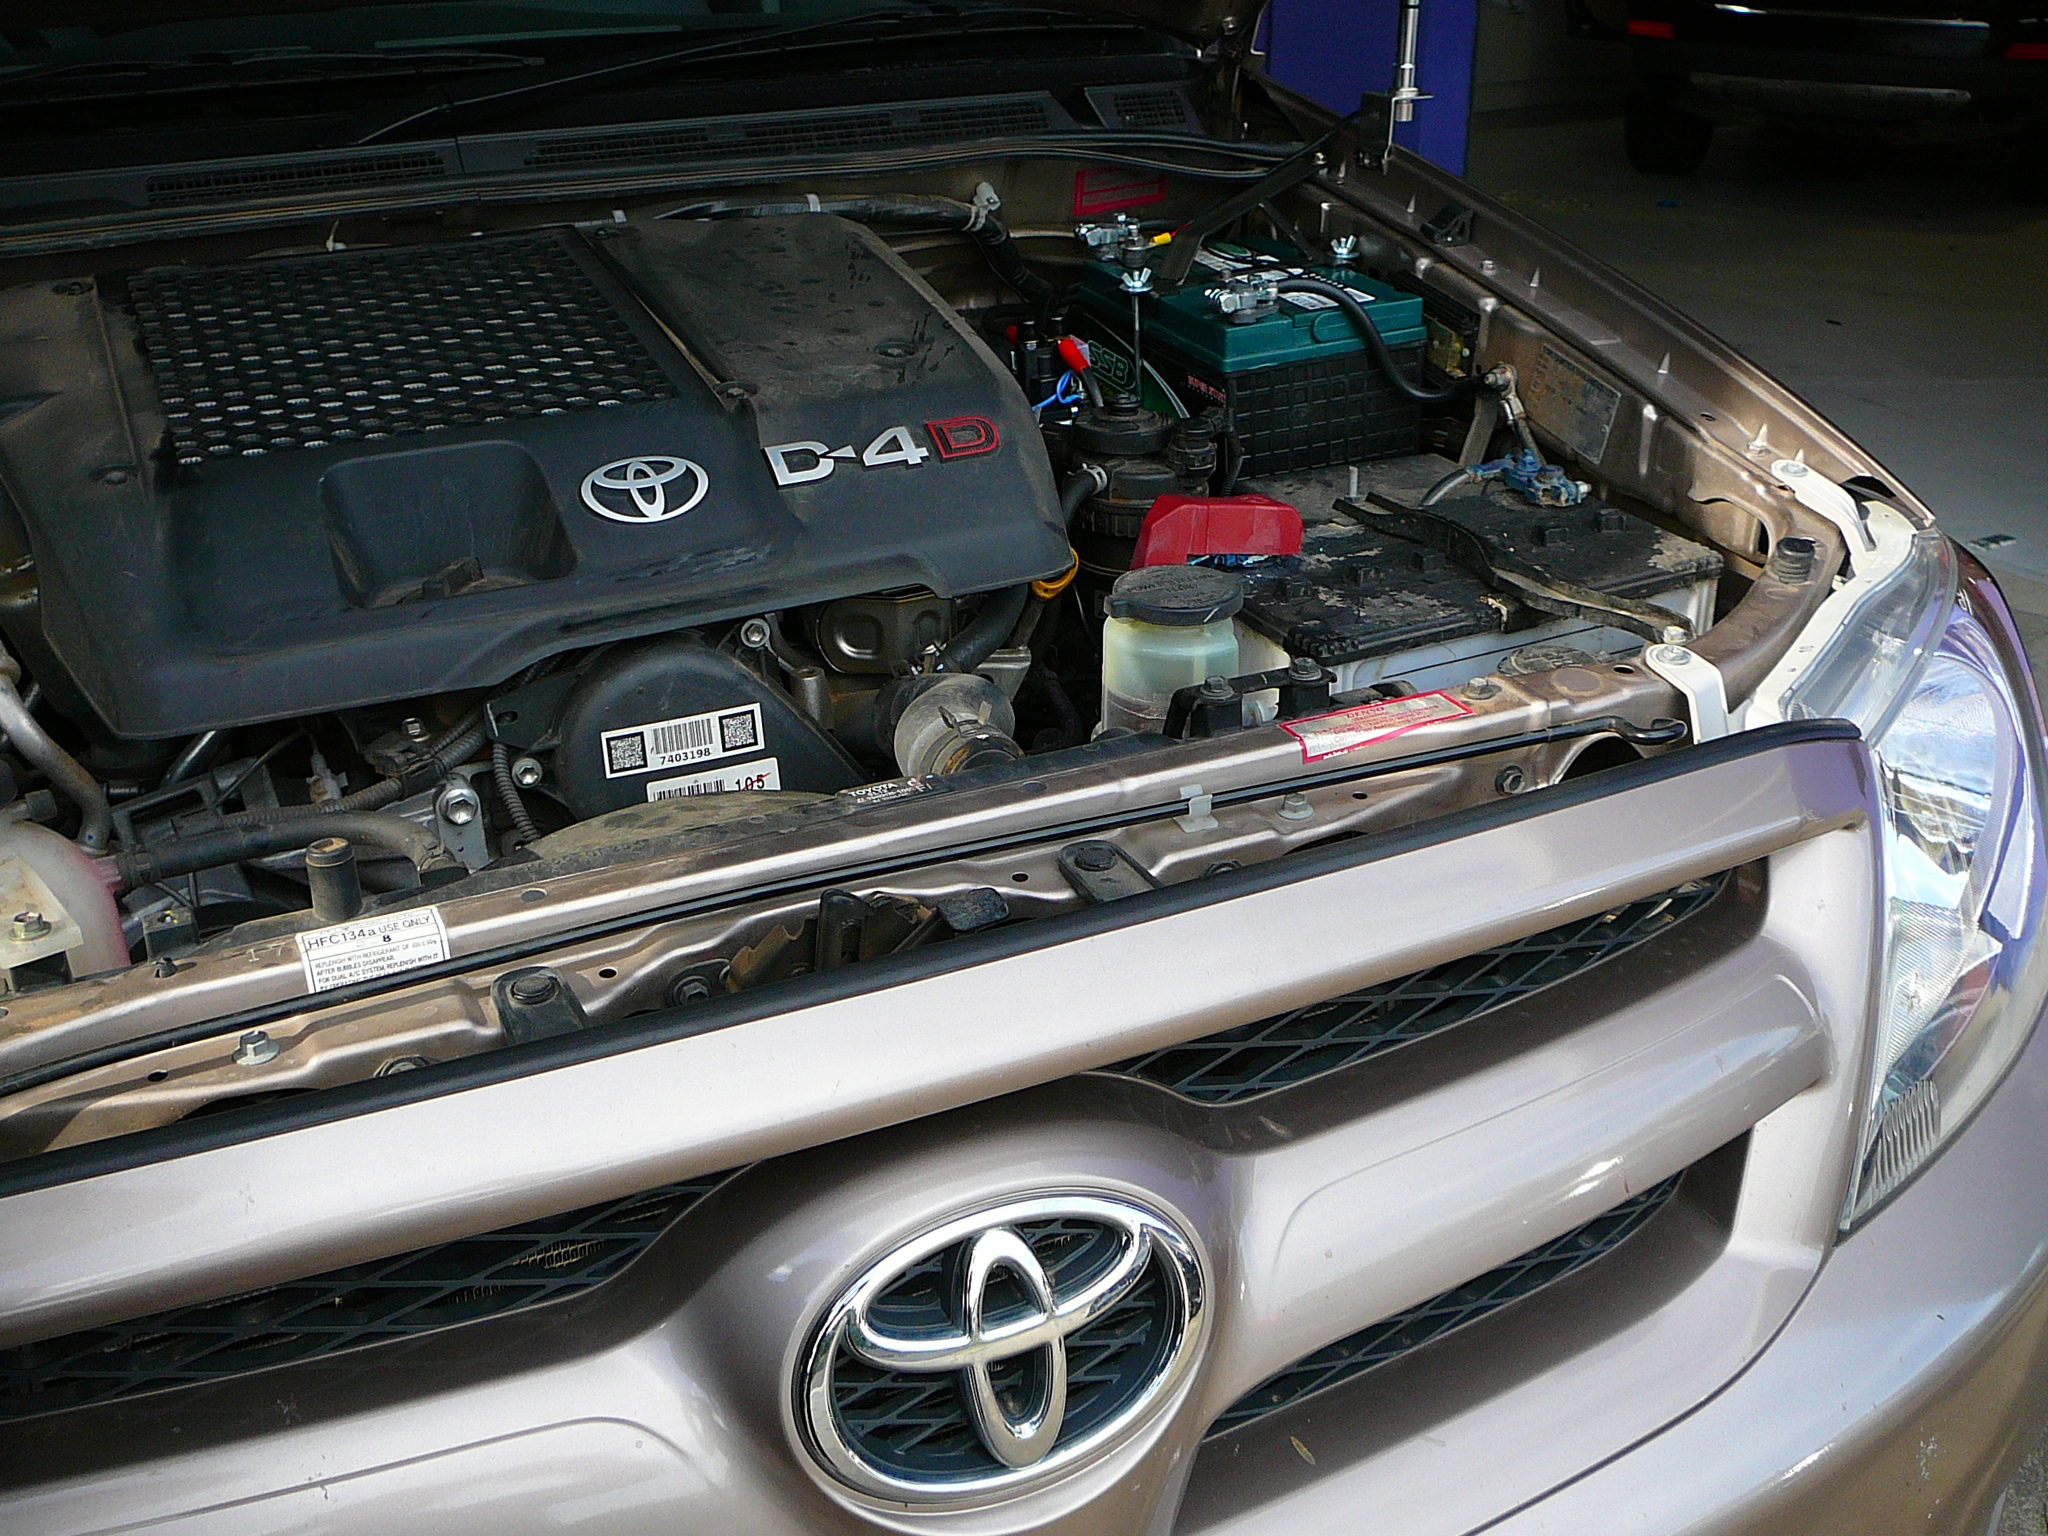 Toyota Hilux 2007, Dual Battery system with Redarc isolator